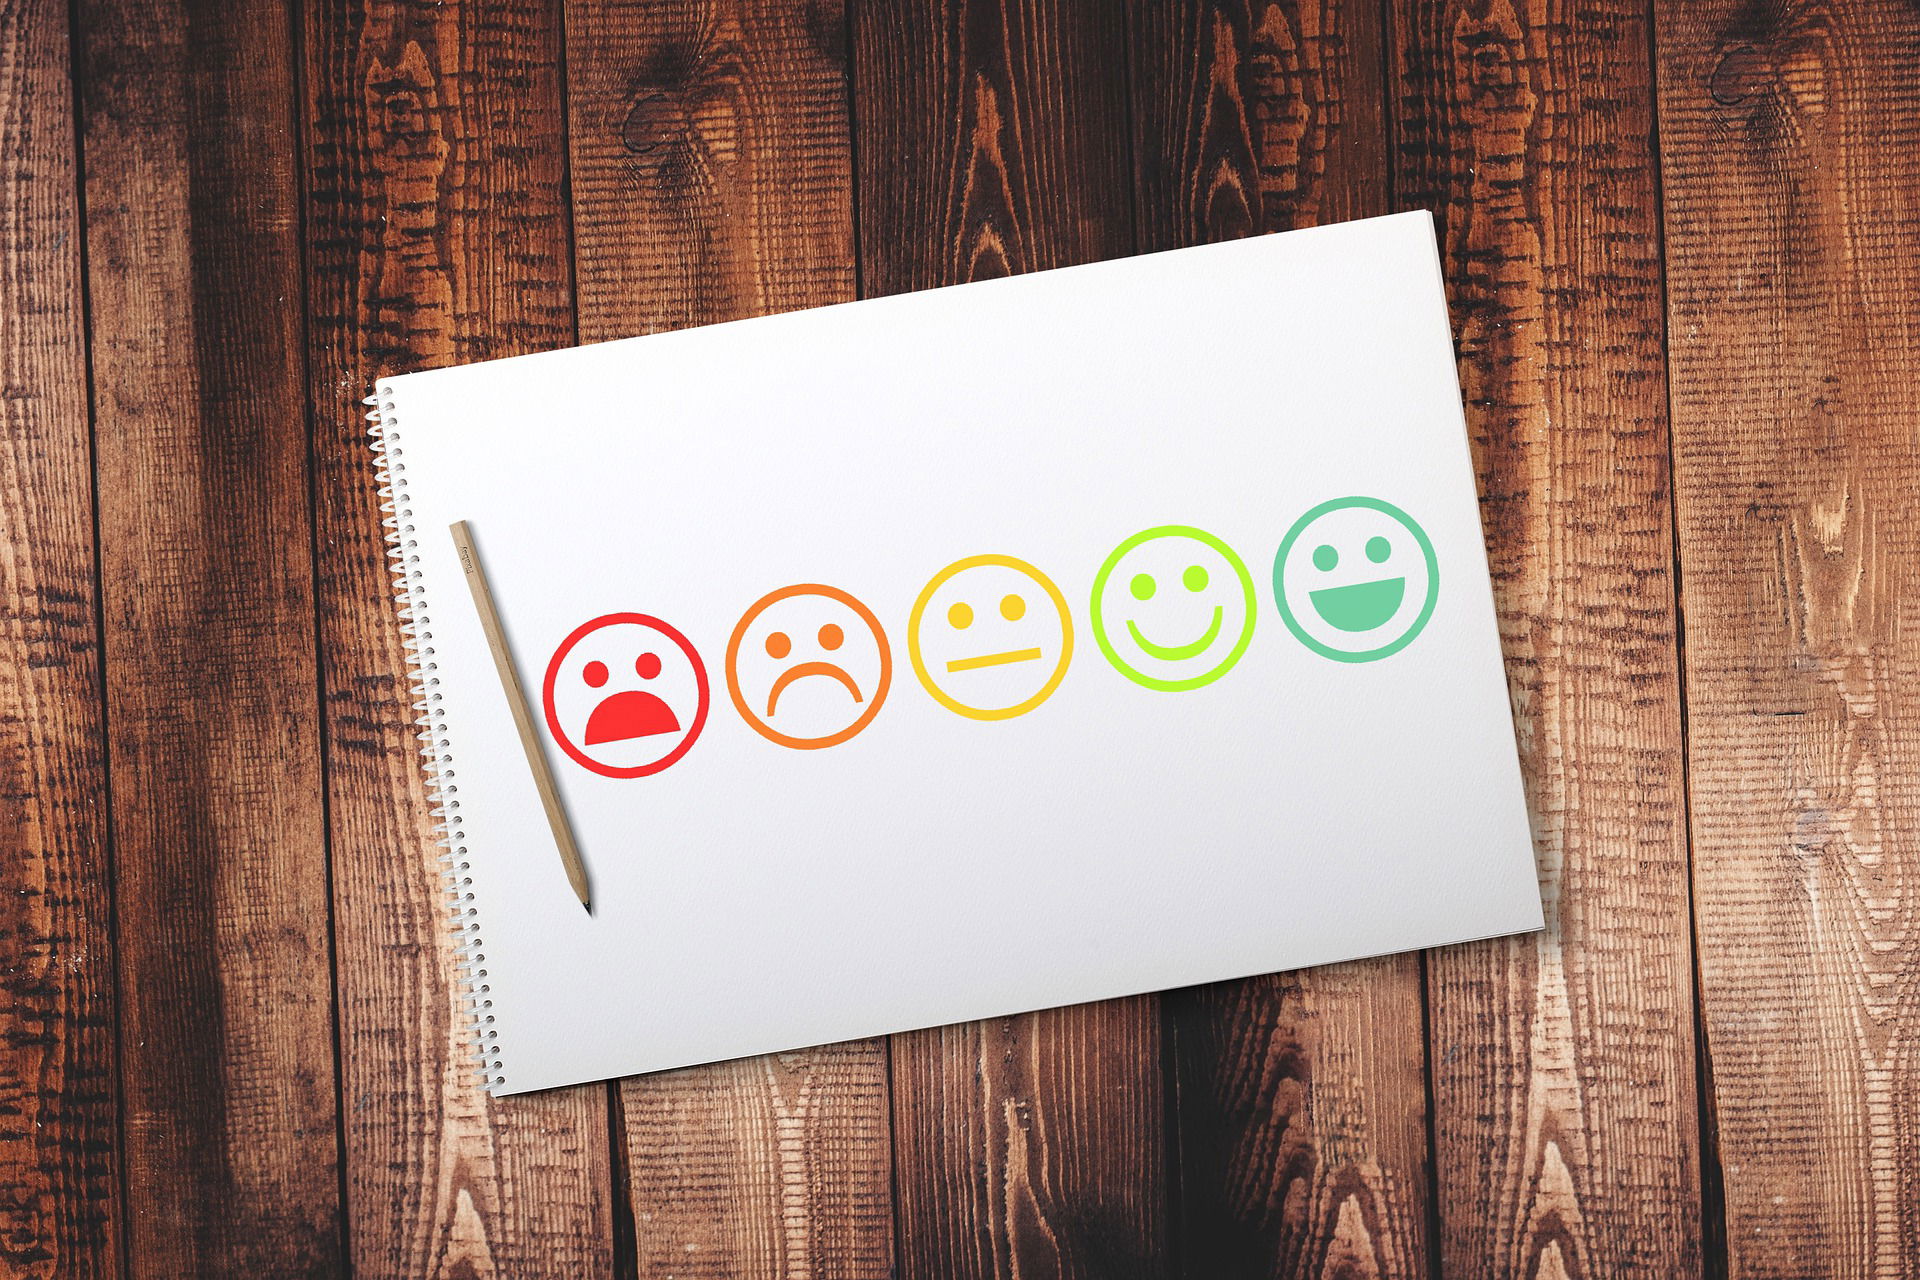 How Do Consumers React to Psychometric-Based Credit Scoring?